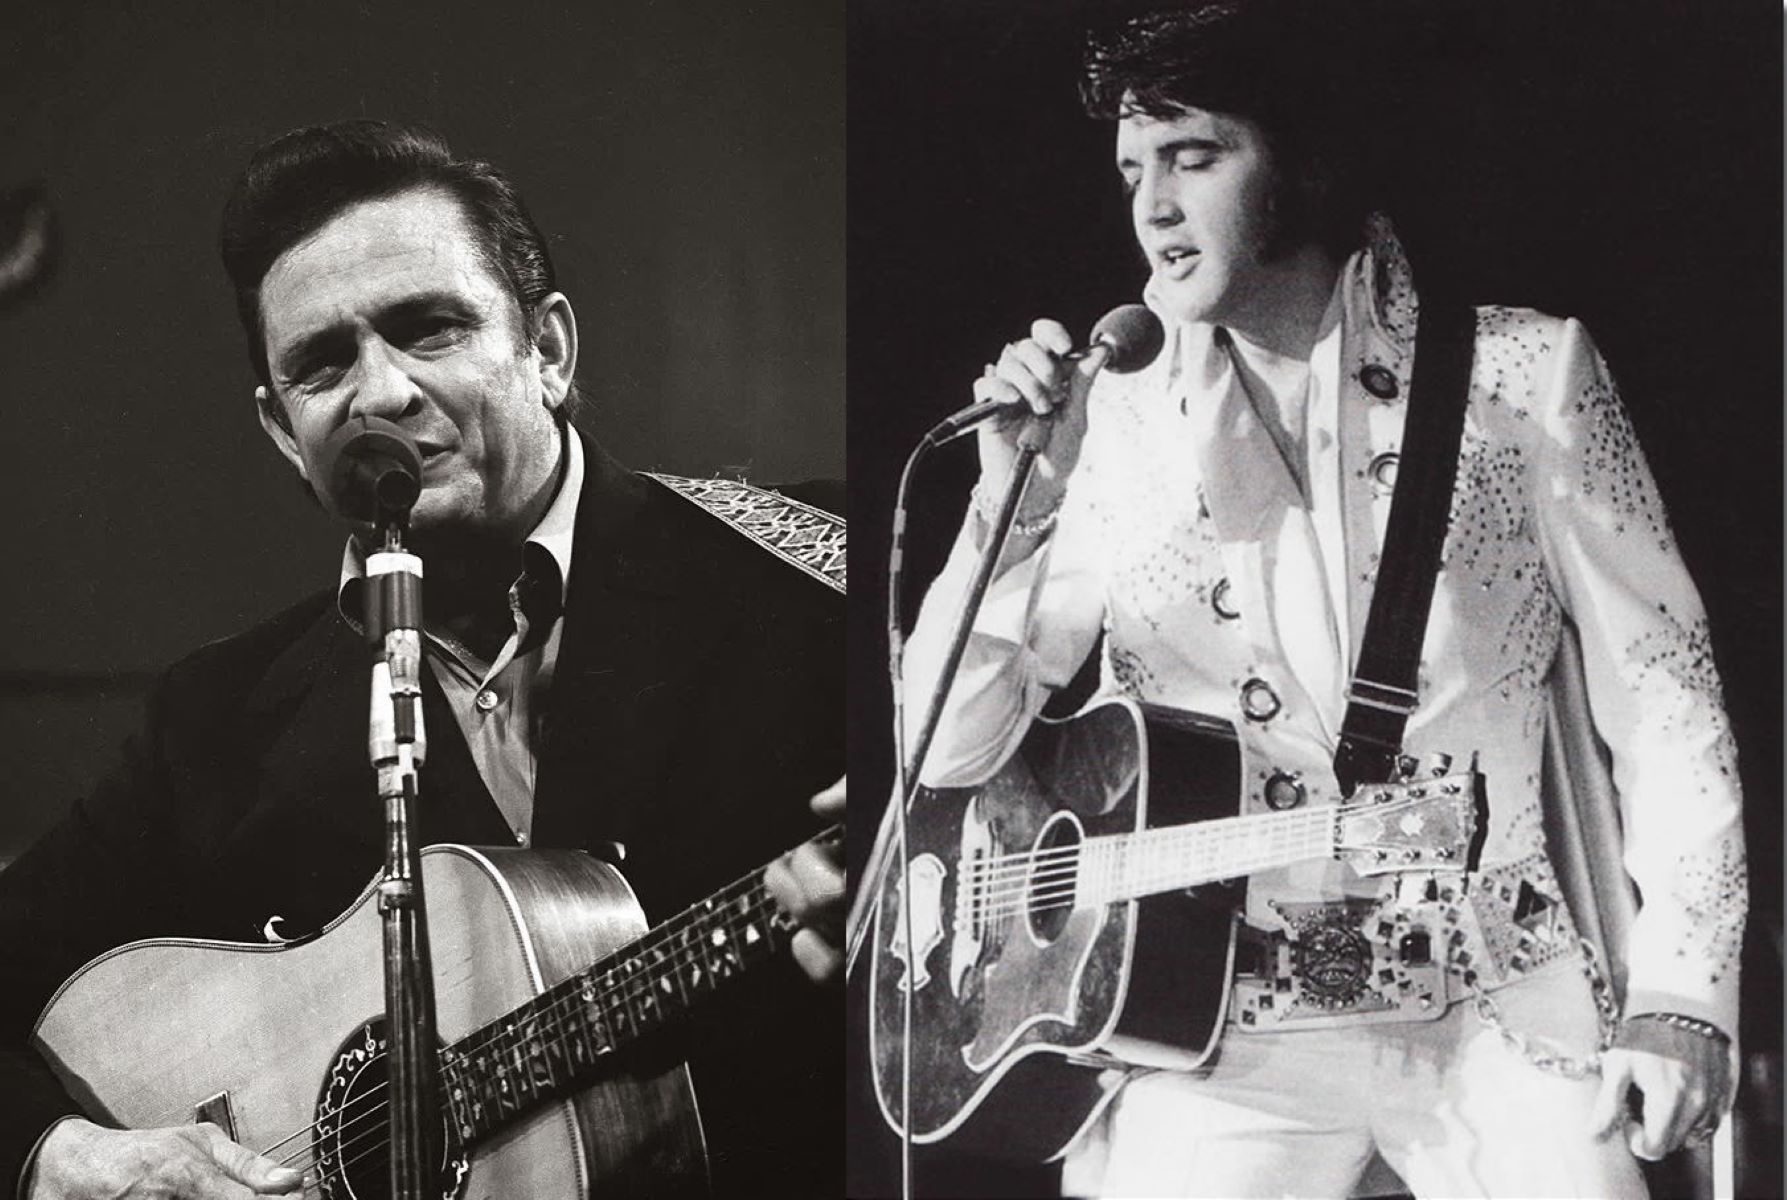 Which Record Label Were Elvis And Johnny Cash Signed With?